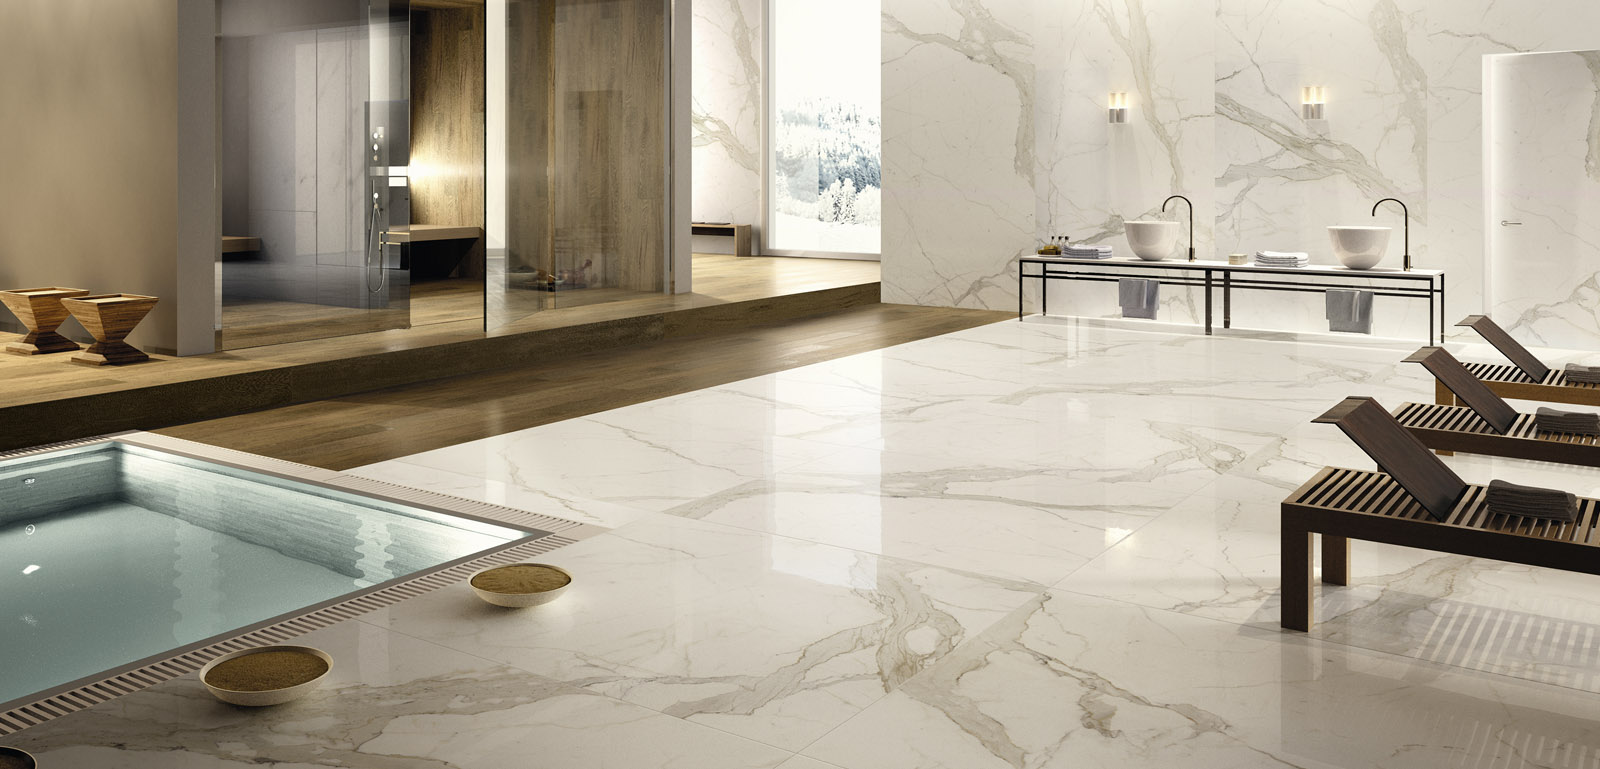 Imported Marble And Italian Marble Service Provider